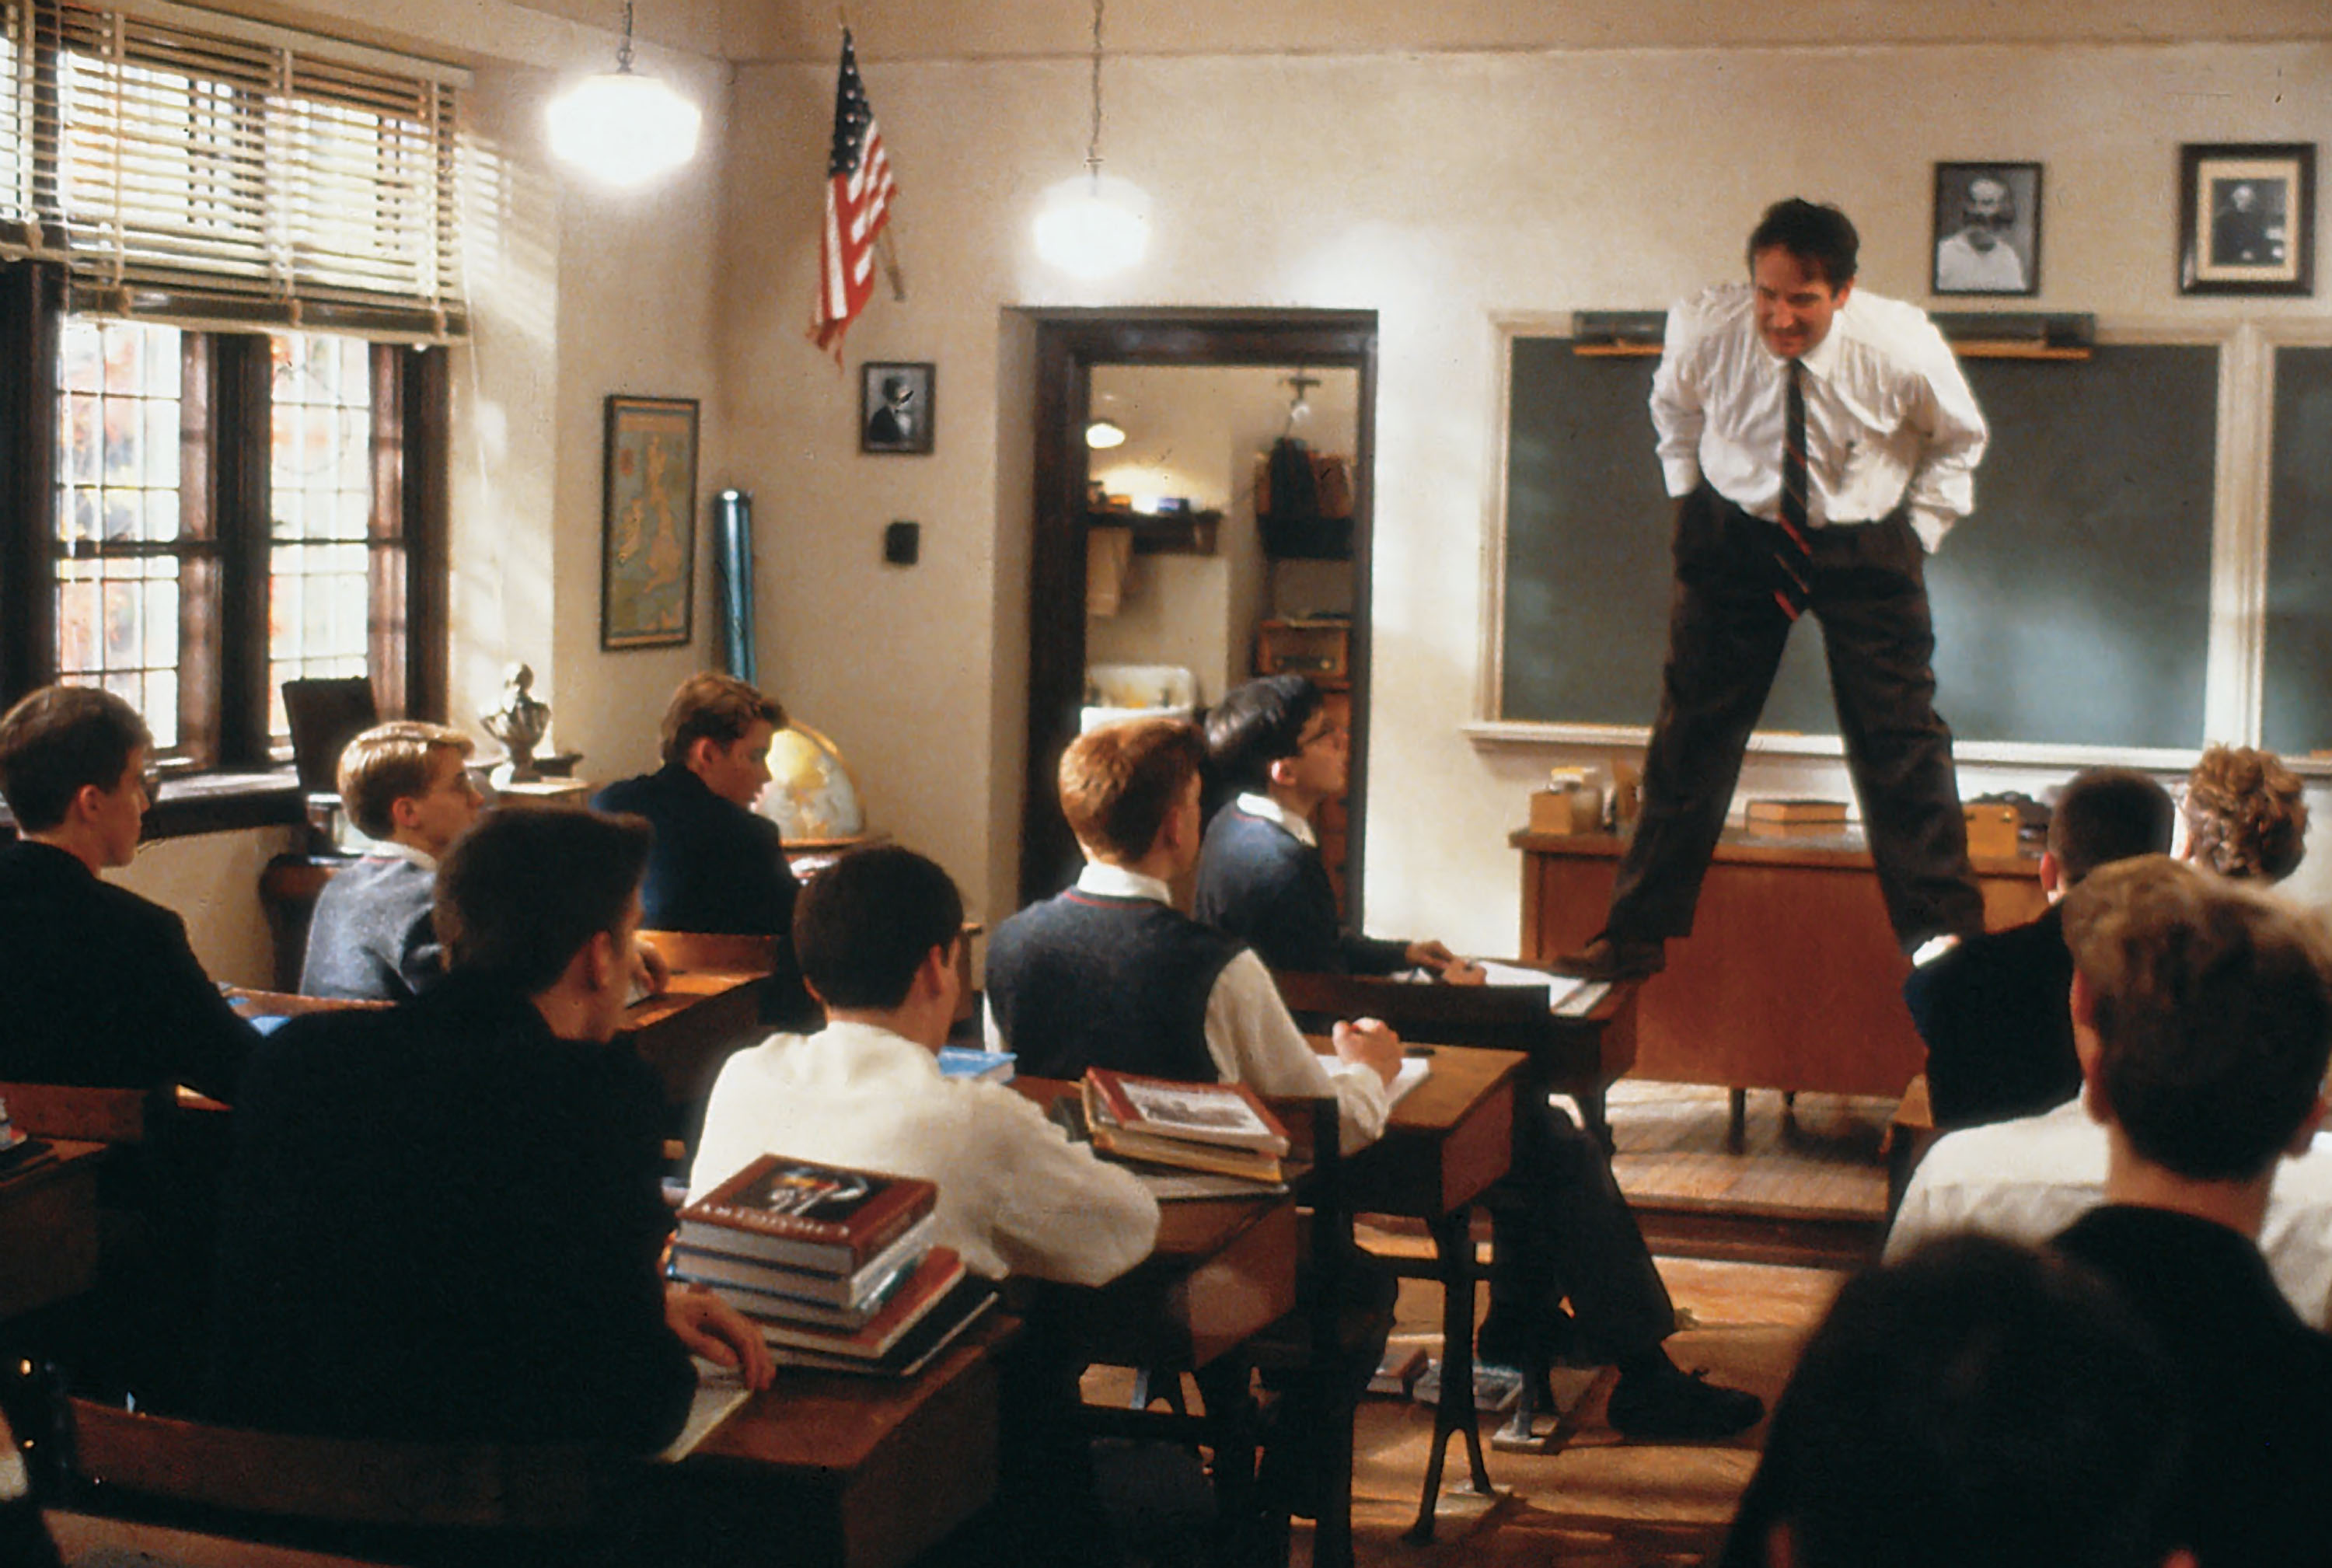 Robin Williams stands on students' desks in a scene from Dead Poets Society.